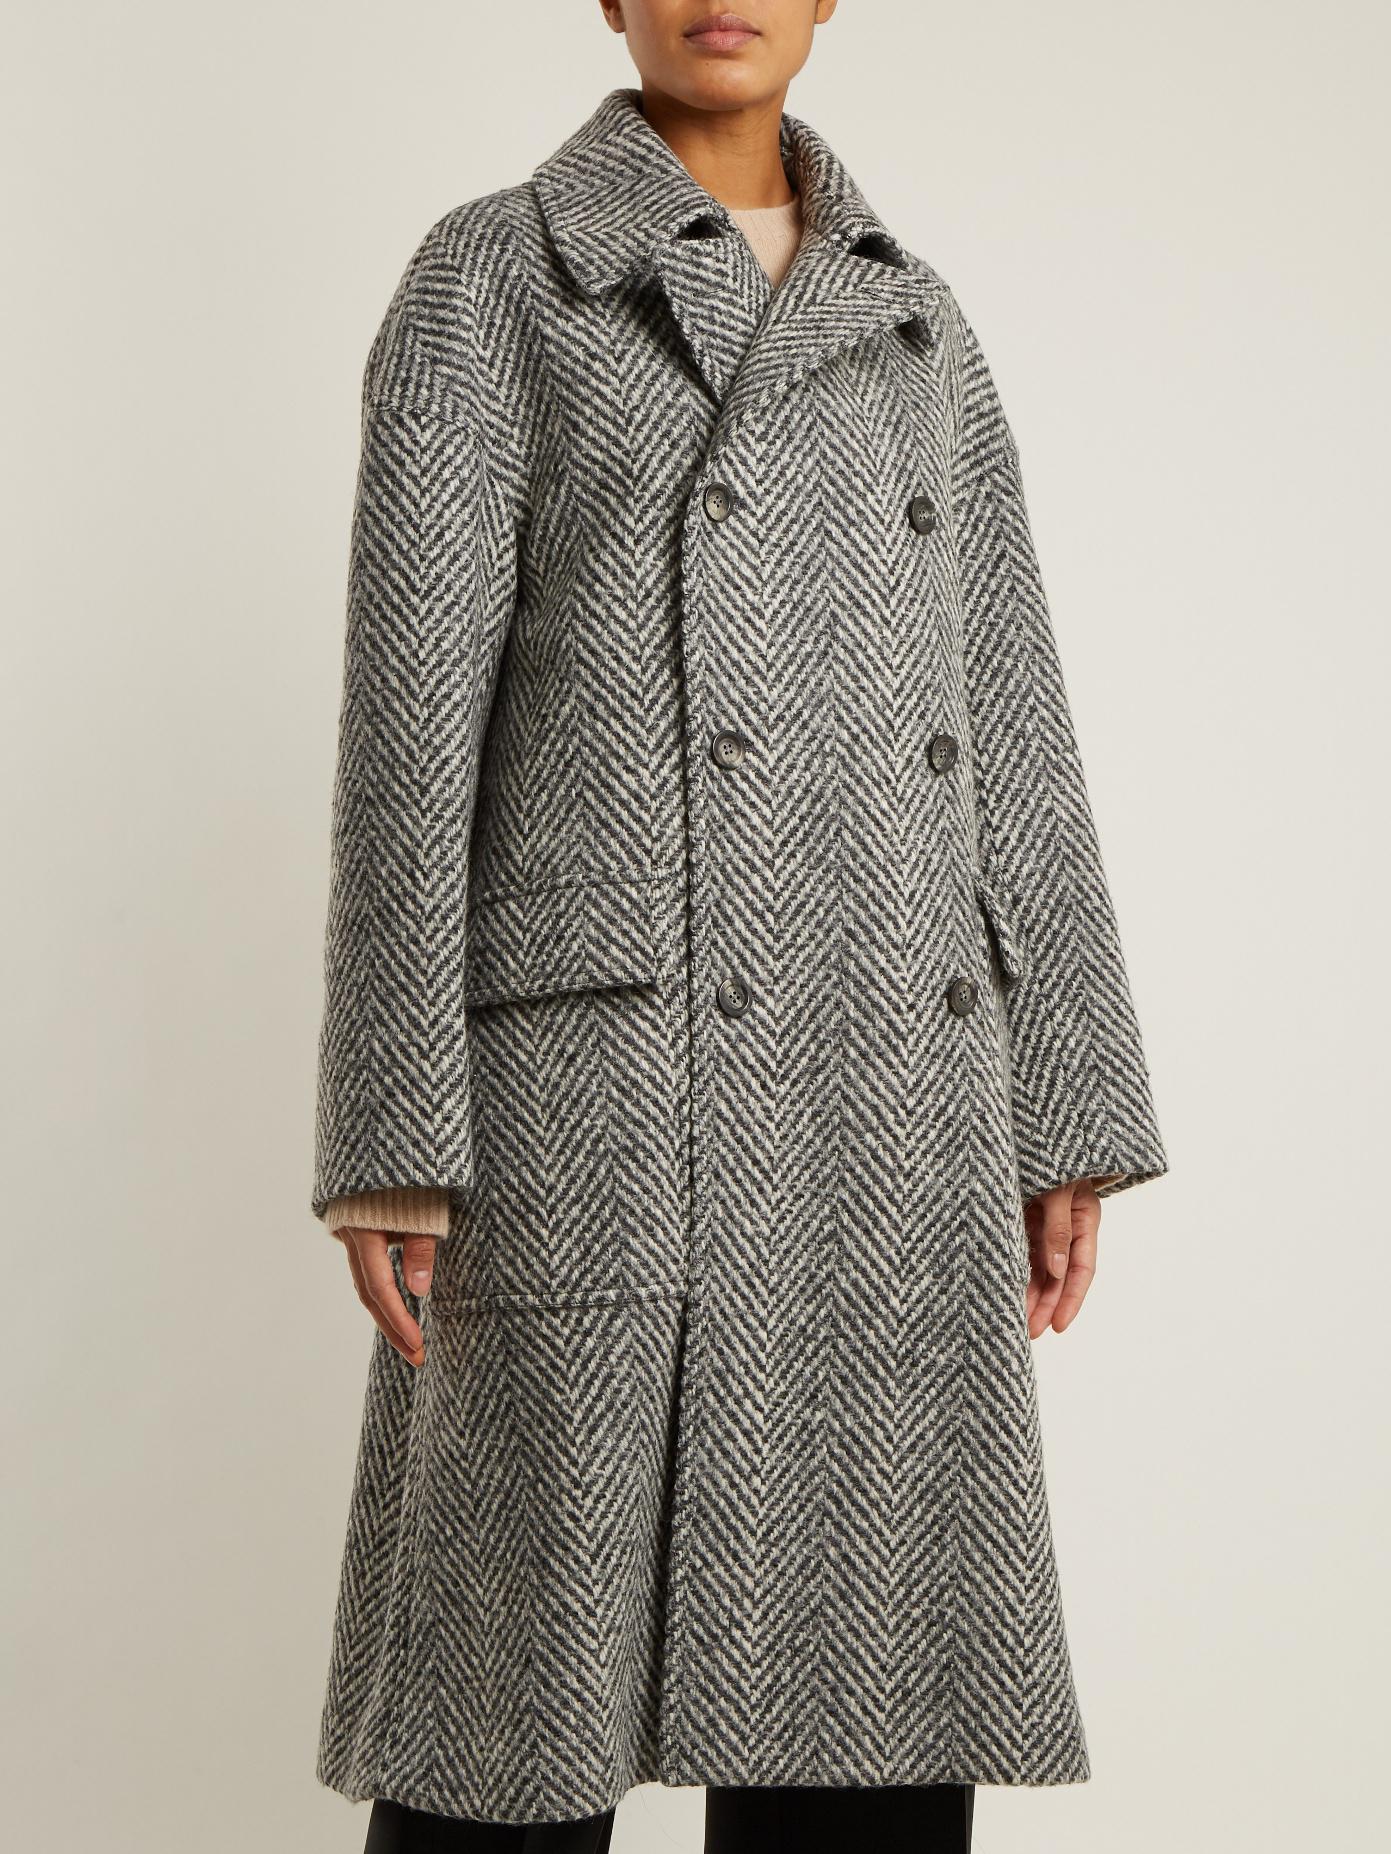 Lyst - Connolly Double-breasted Herringbone Oversized Wool Coat in Gray